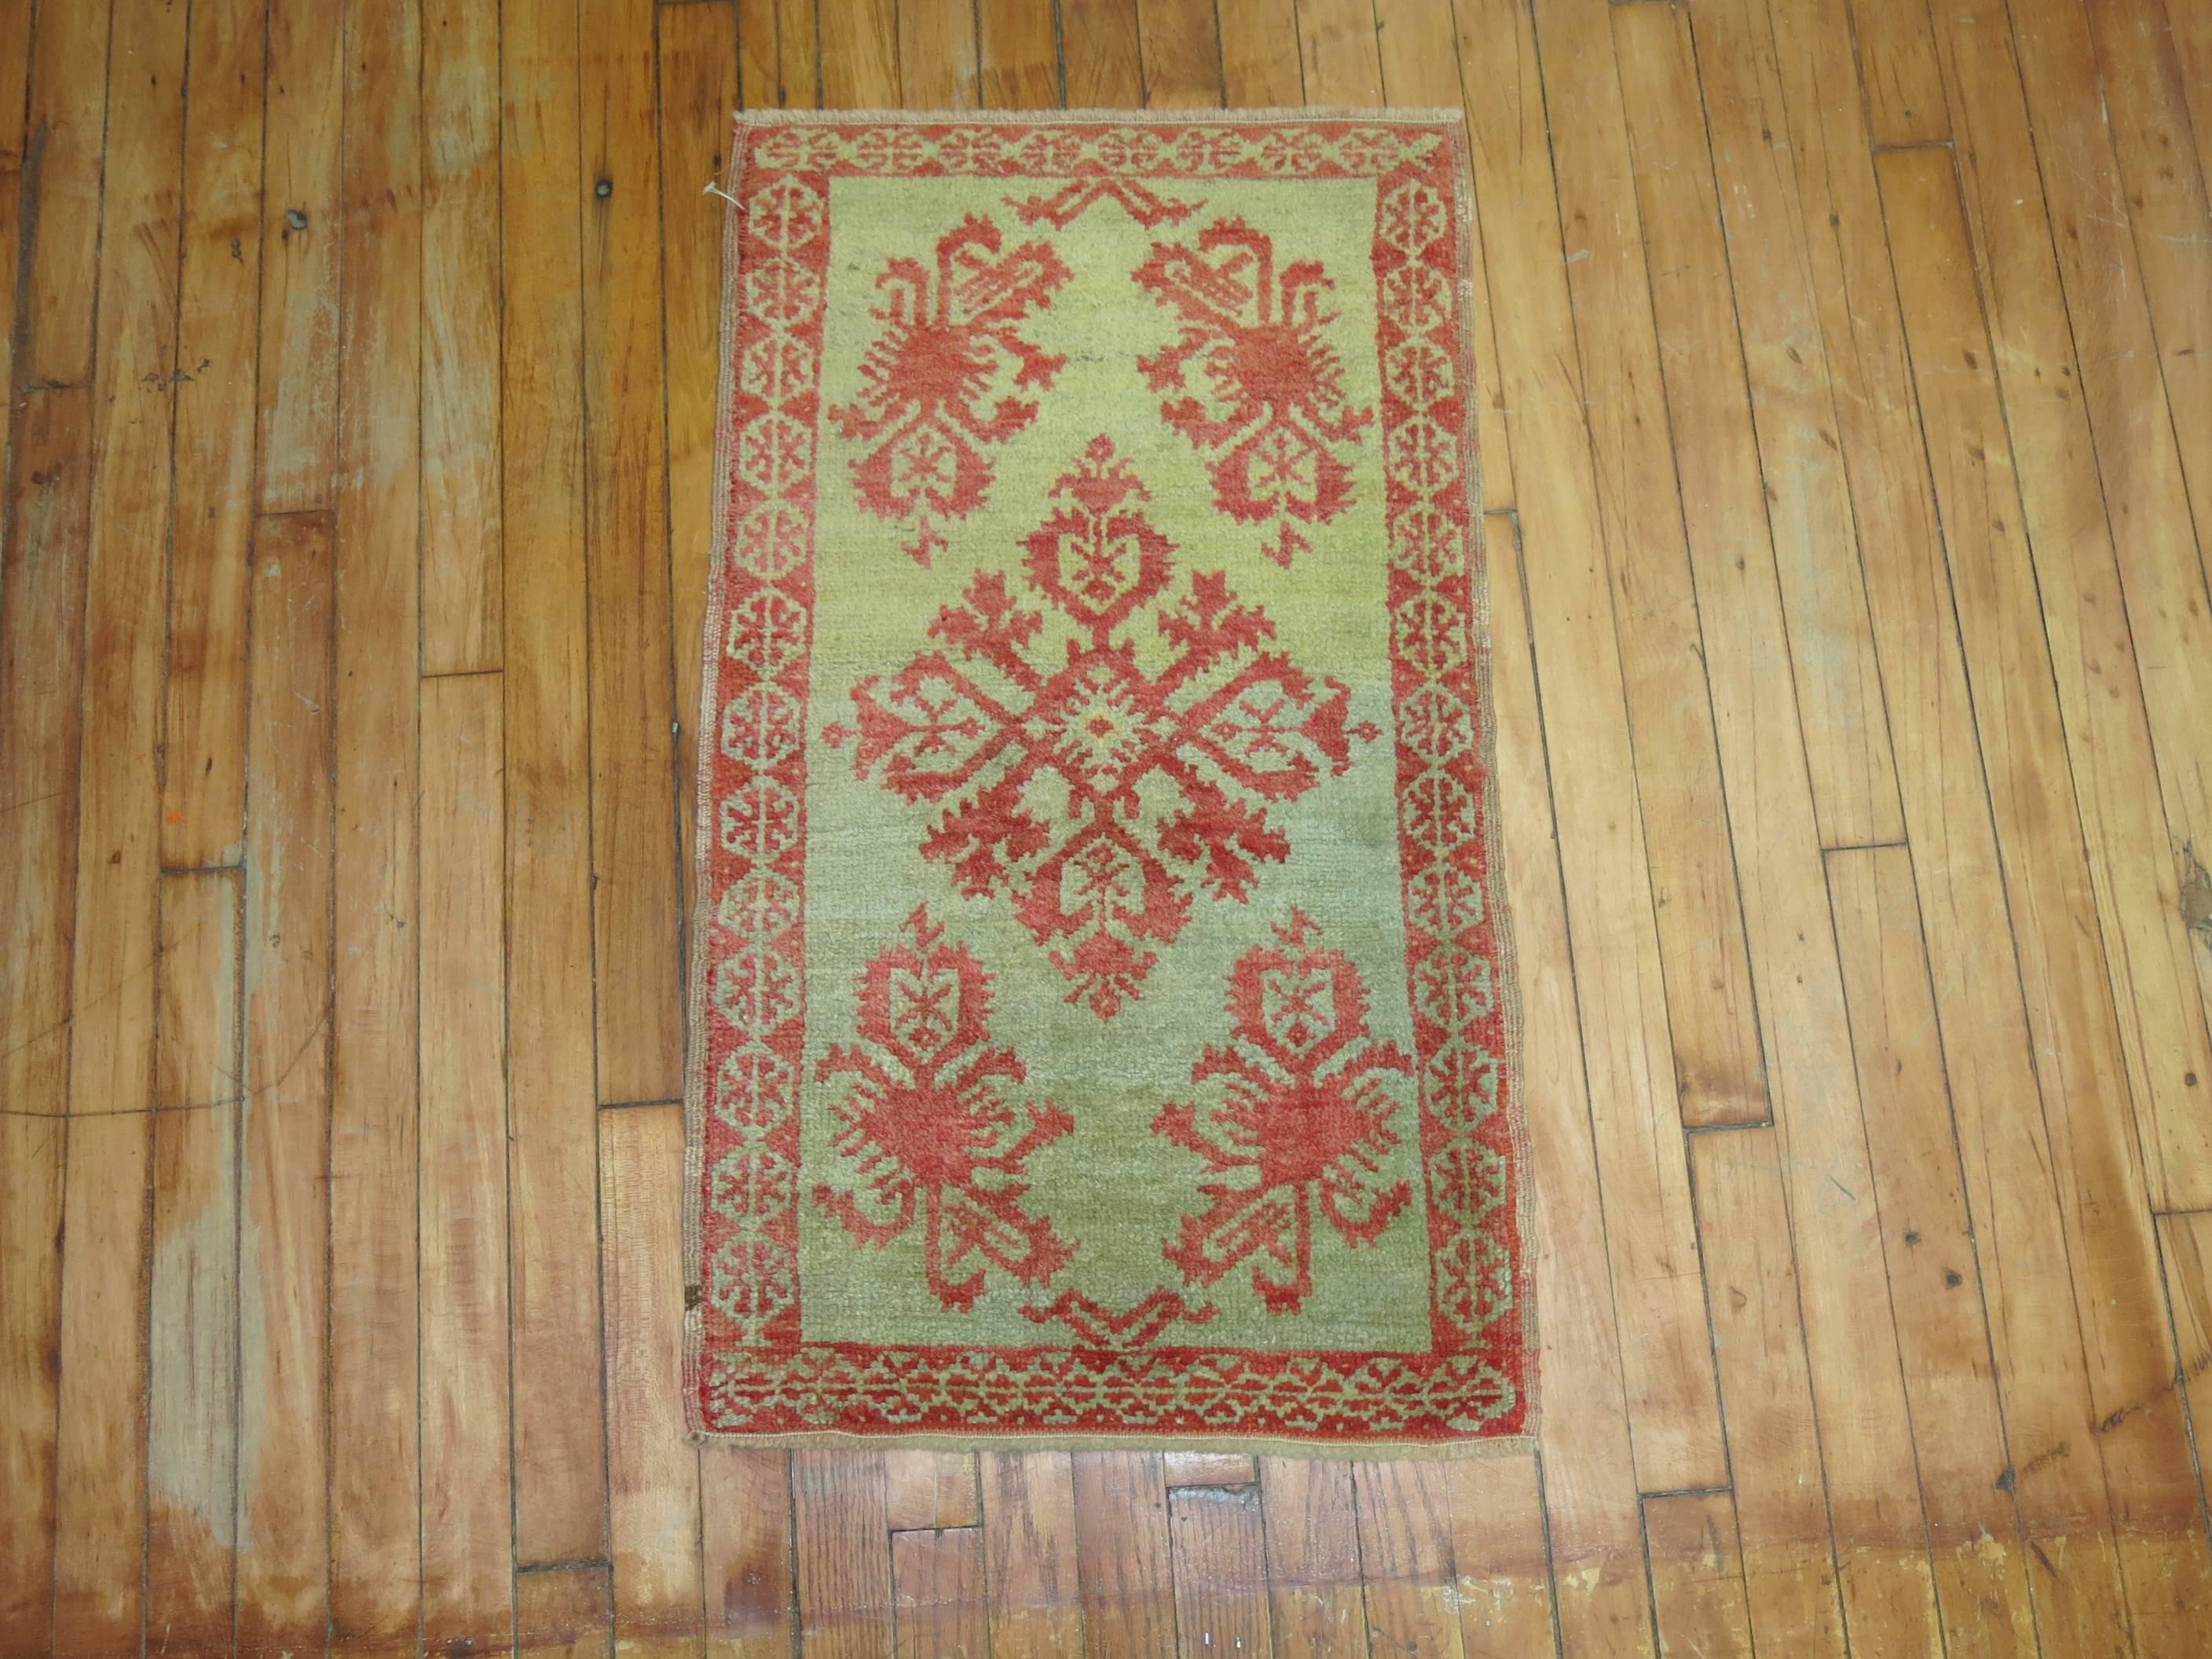 Early 20th century Turkish Sivas rug in rich greens and reds.